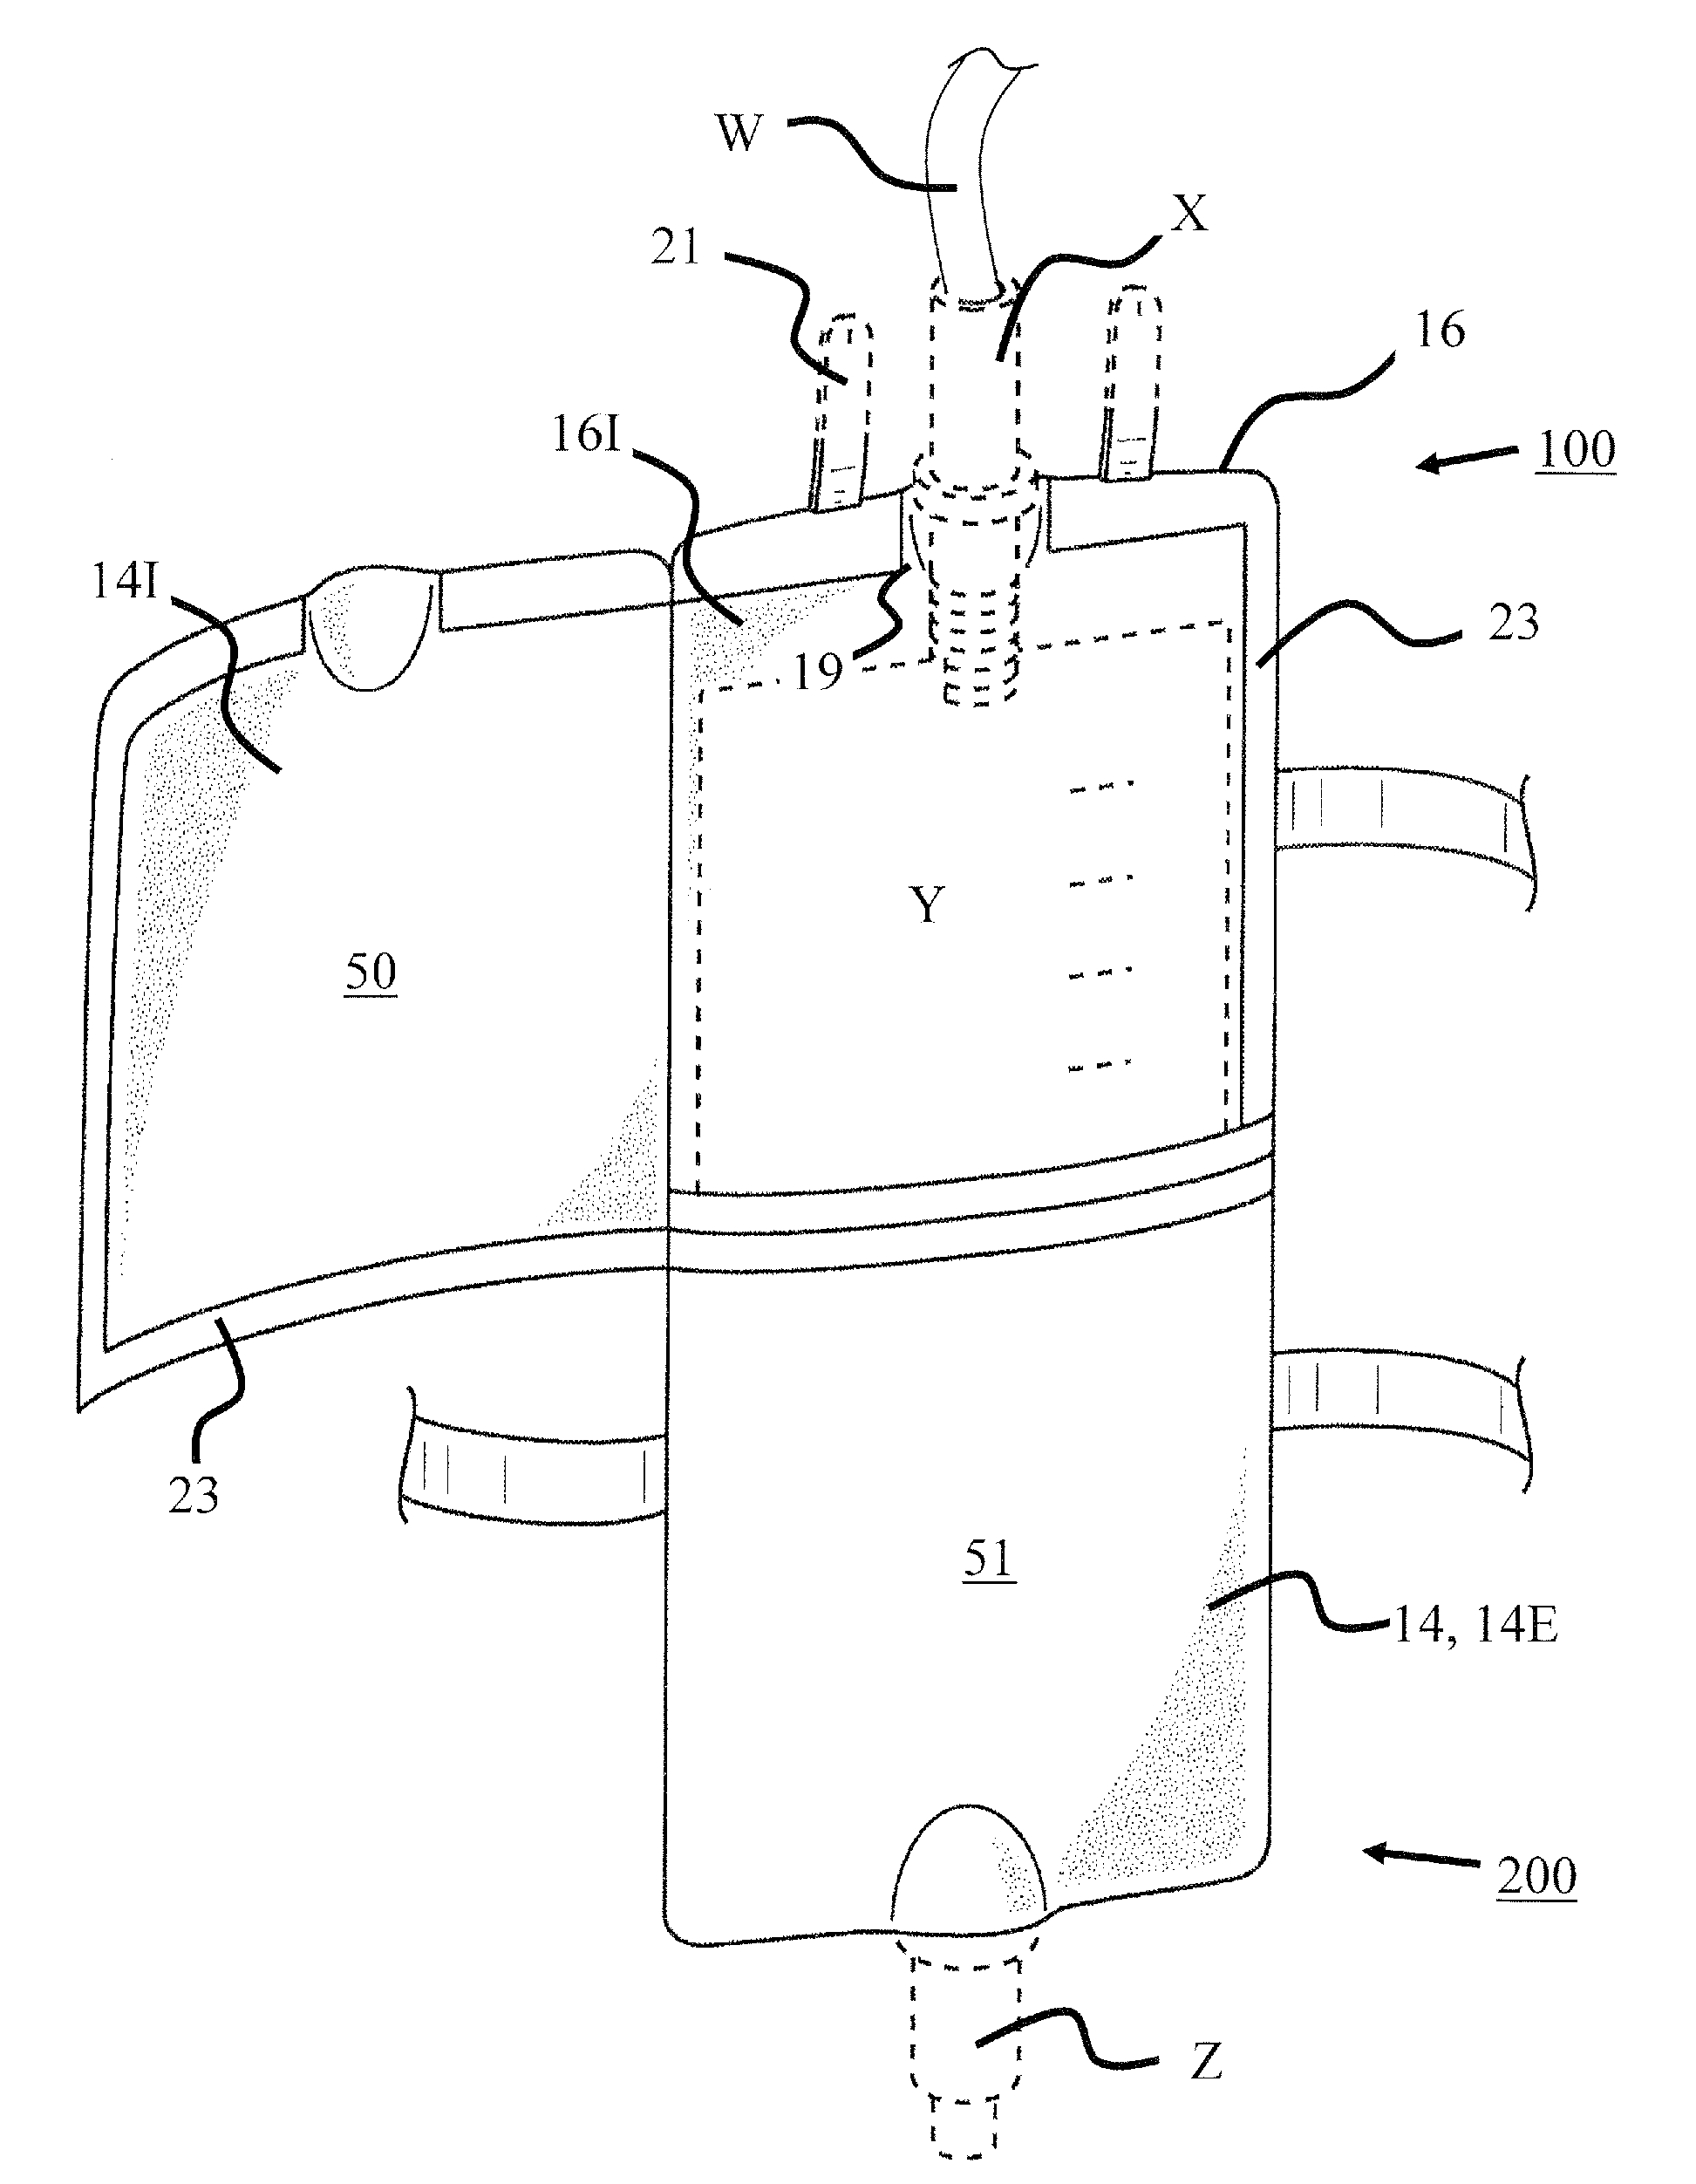 Methods and devices for concealing and securing a urine collection bag